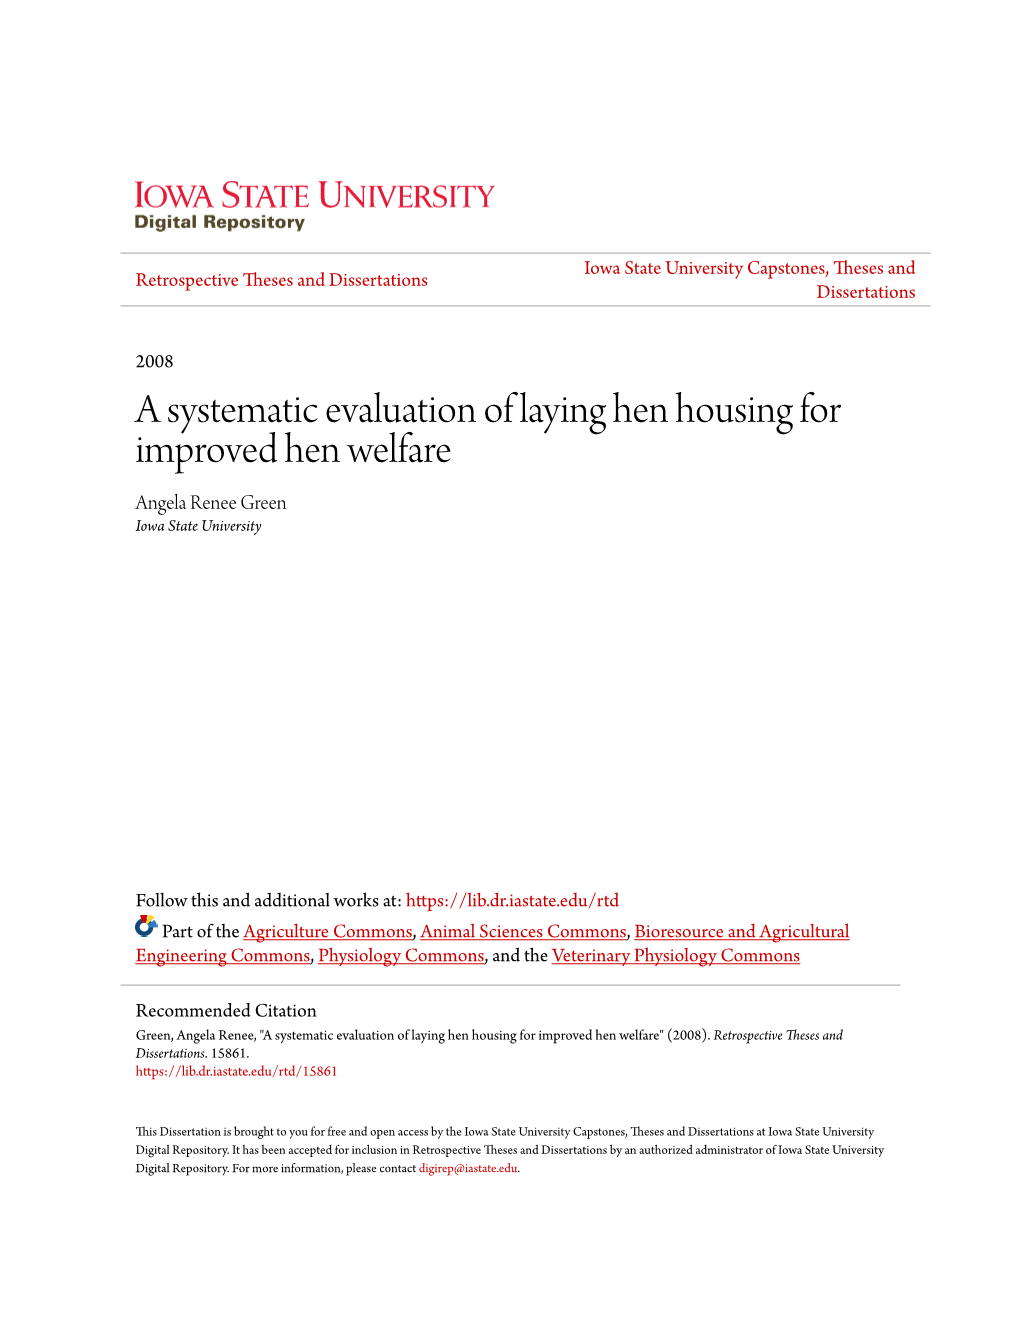 A Systematic Evaluation of Laying Hen Housing for Improved Hen Welfare Angela Renee Green Iowa State University